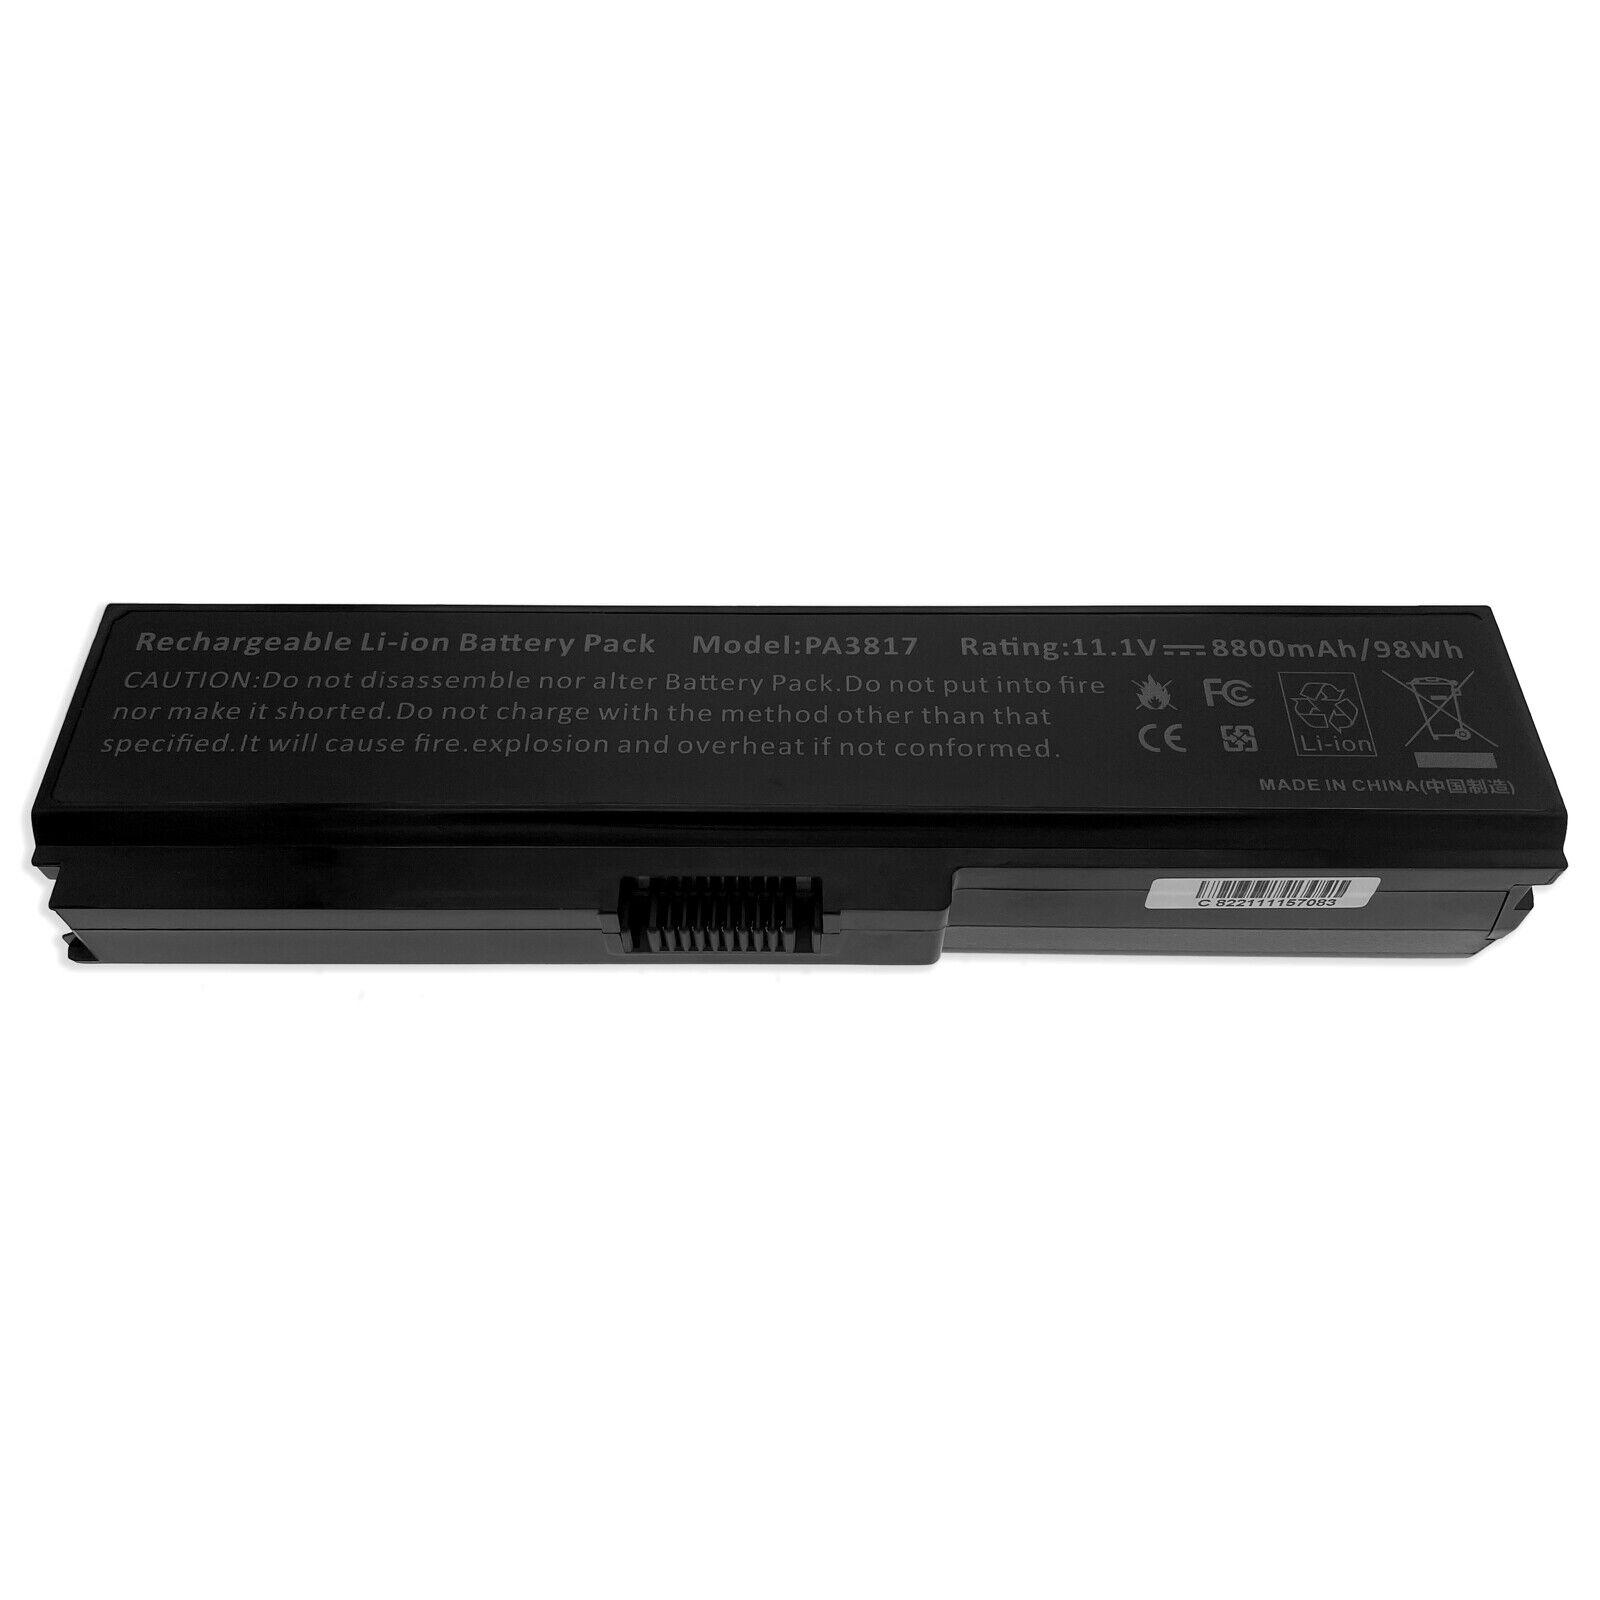 12 Cell New Battery for Toshiba Satellite T110 T115 T115D T130 T135 T135D Laptop